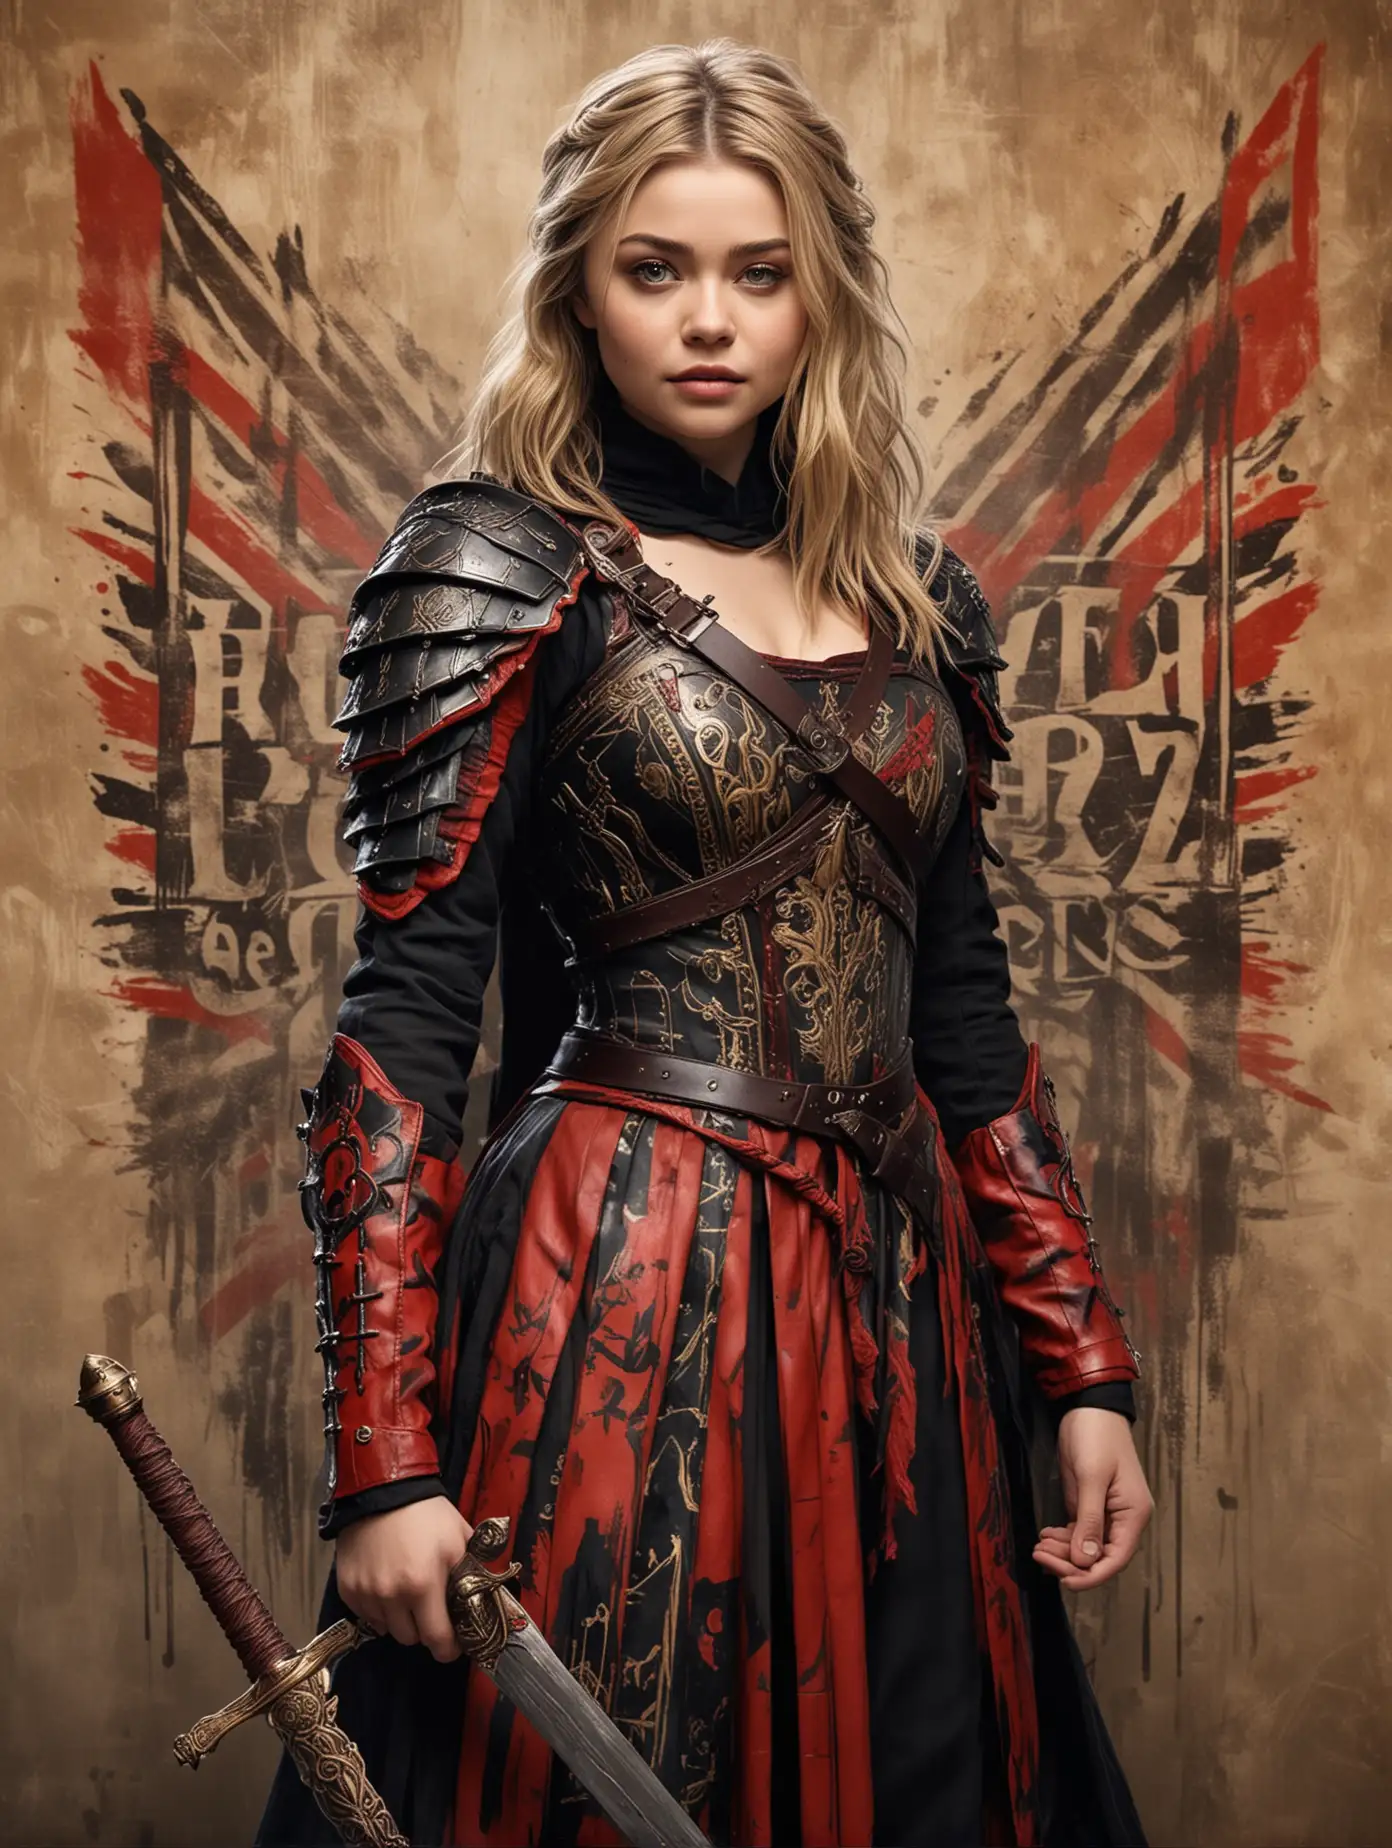 Create an image of a beautiful Chloe Grace Moretz is cosplaying as britain paladin with detailed facial features, standing against an abstract painted background with brush strokes and eropean kingdom characters. She is dressed in a traditional garment with red and black hues, a long sword on her back, and her shoulder adorned with intricate text tattoos.